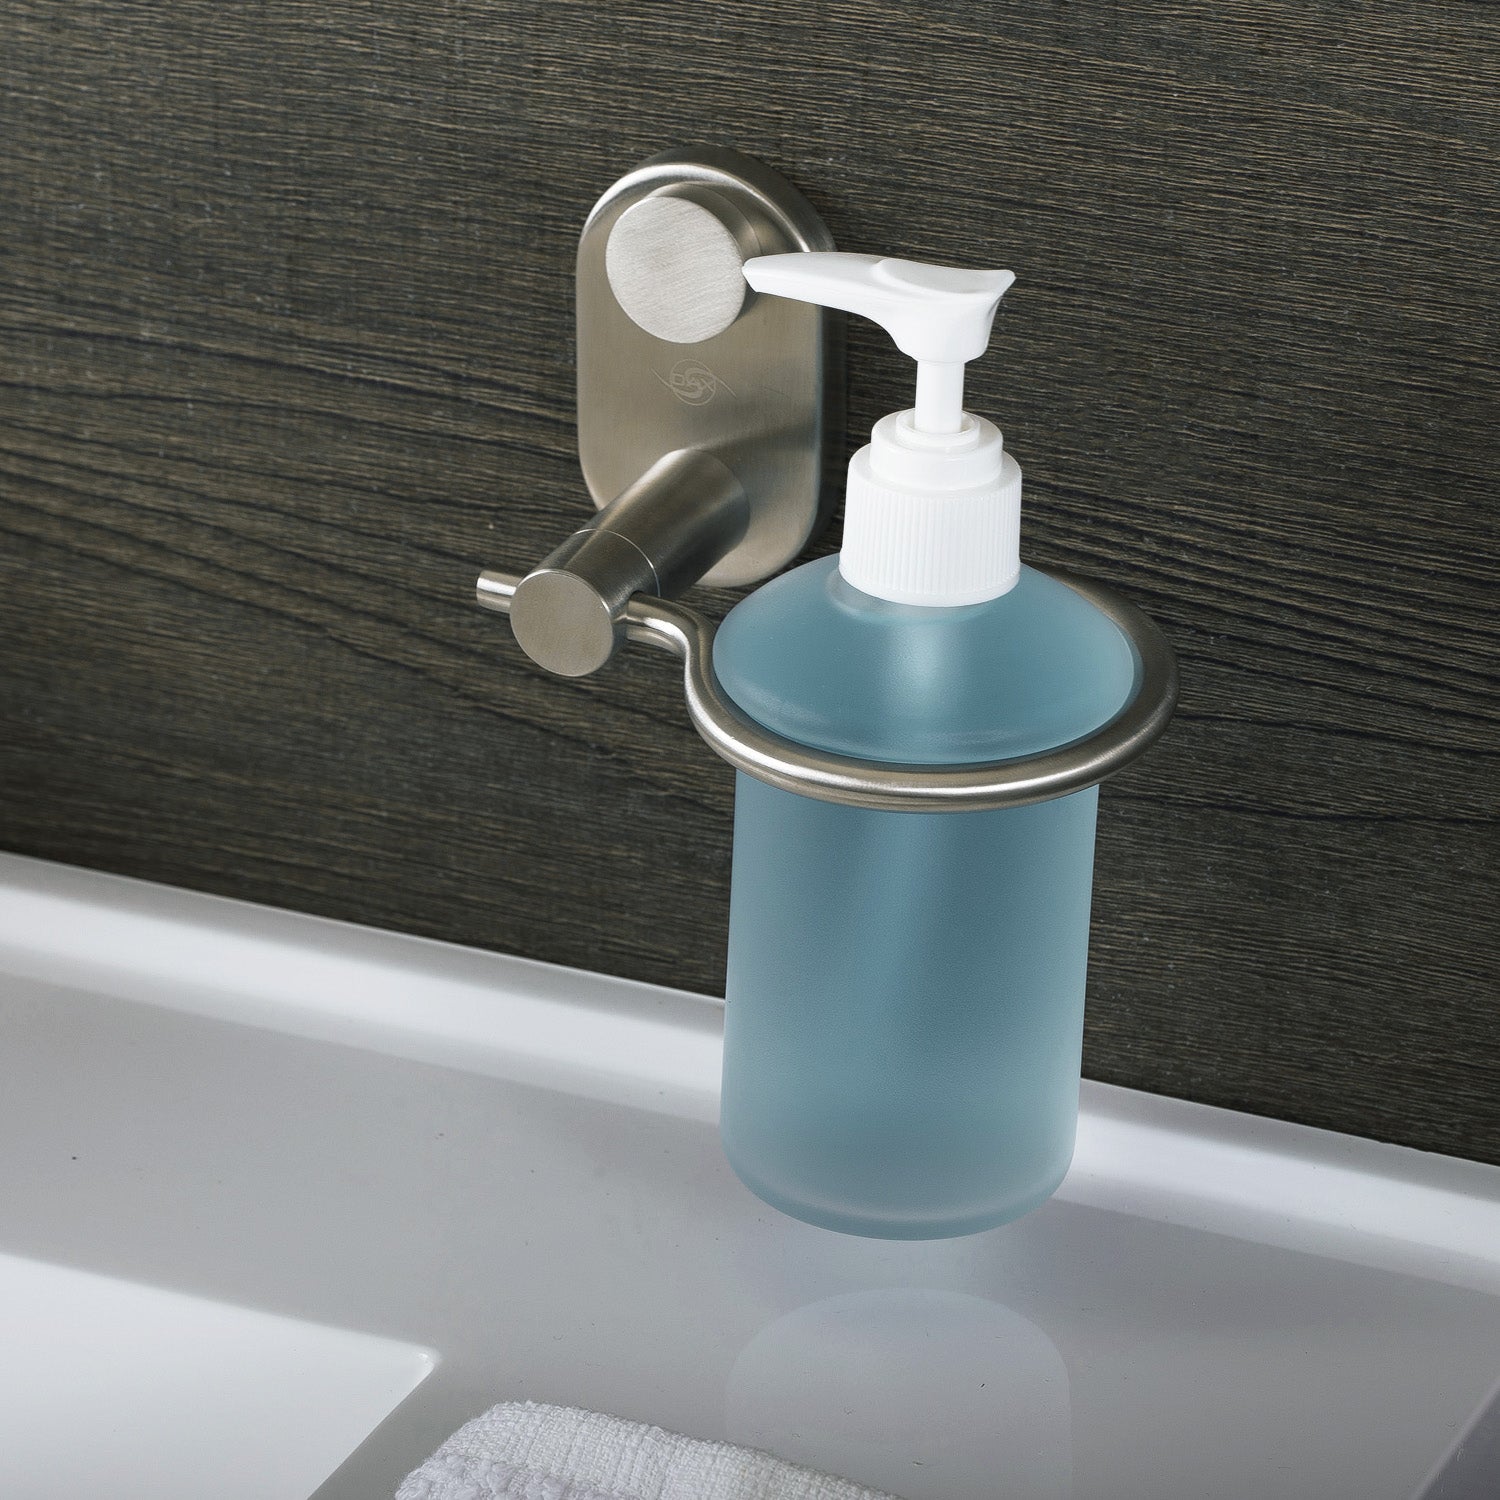 DAX Stainless Steel Soap Dispenser with Glass Bottle, Wall Mount, Polish Finish, 6-1/2 x 4-1/8 x 4-15/16 Inches (DAX-G0213-P)